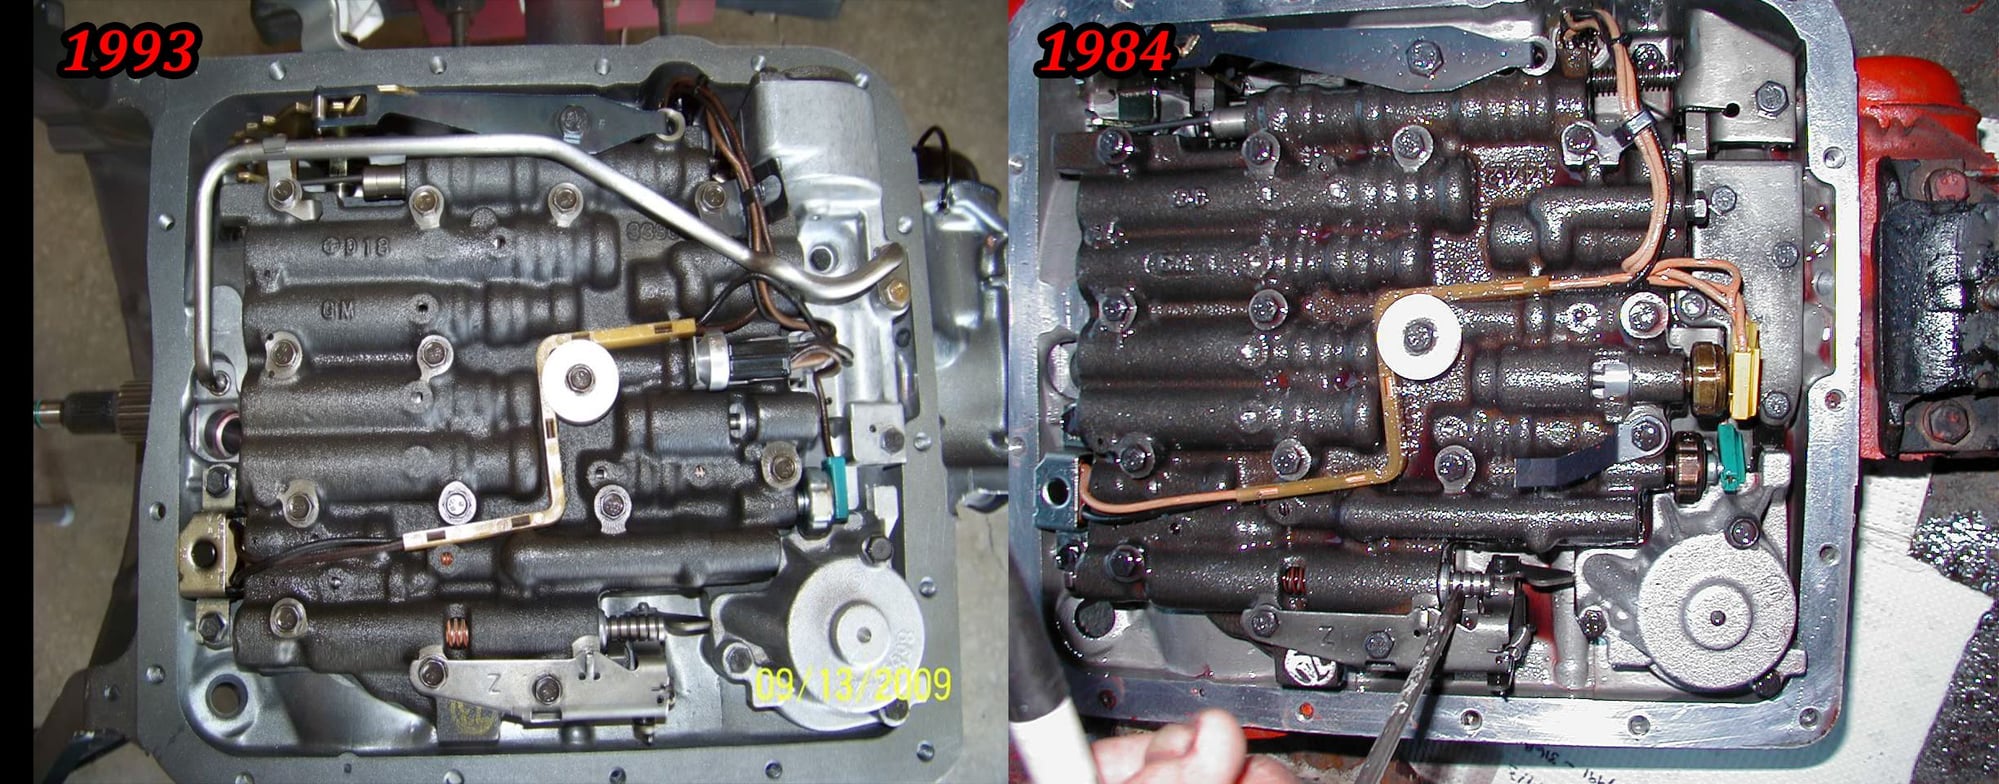 700r4 auxiliary valve body function